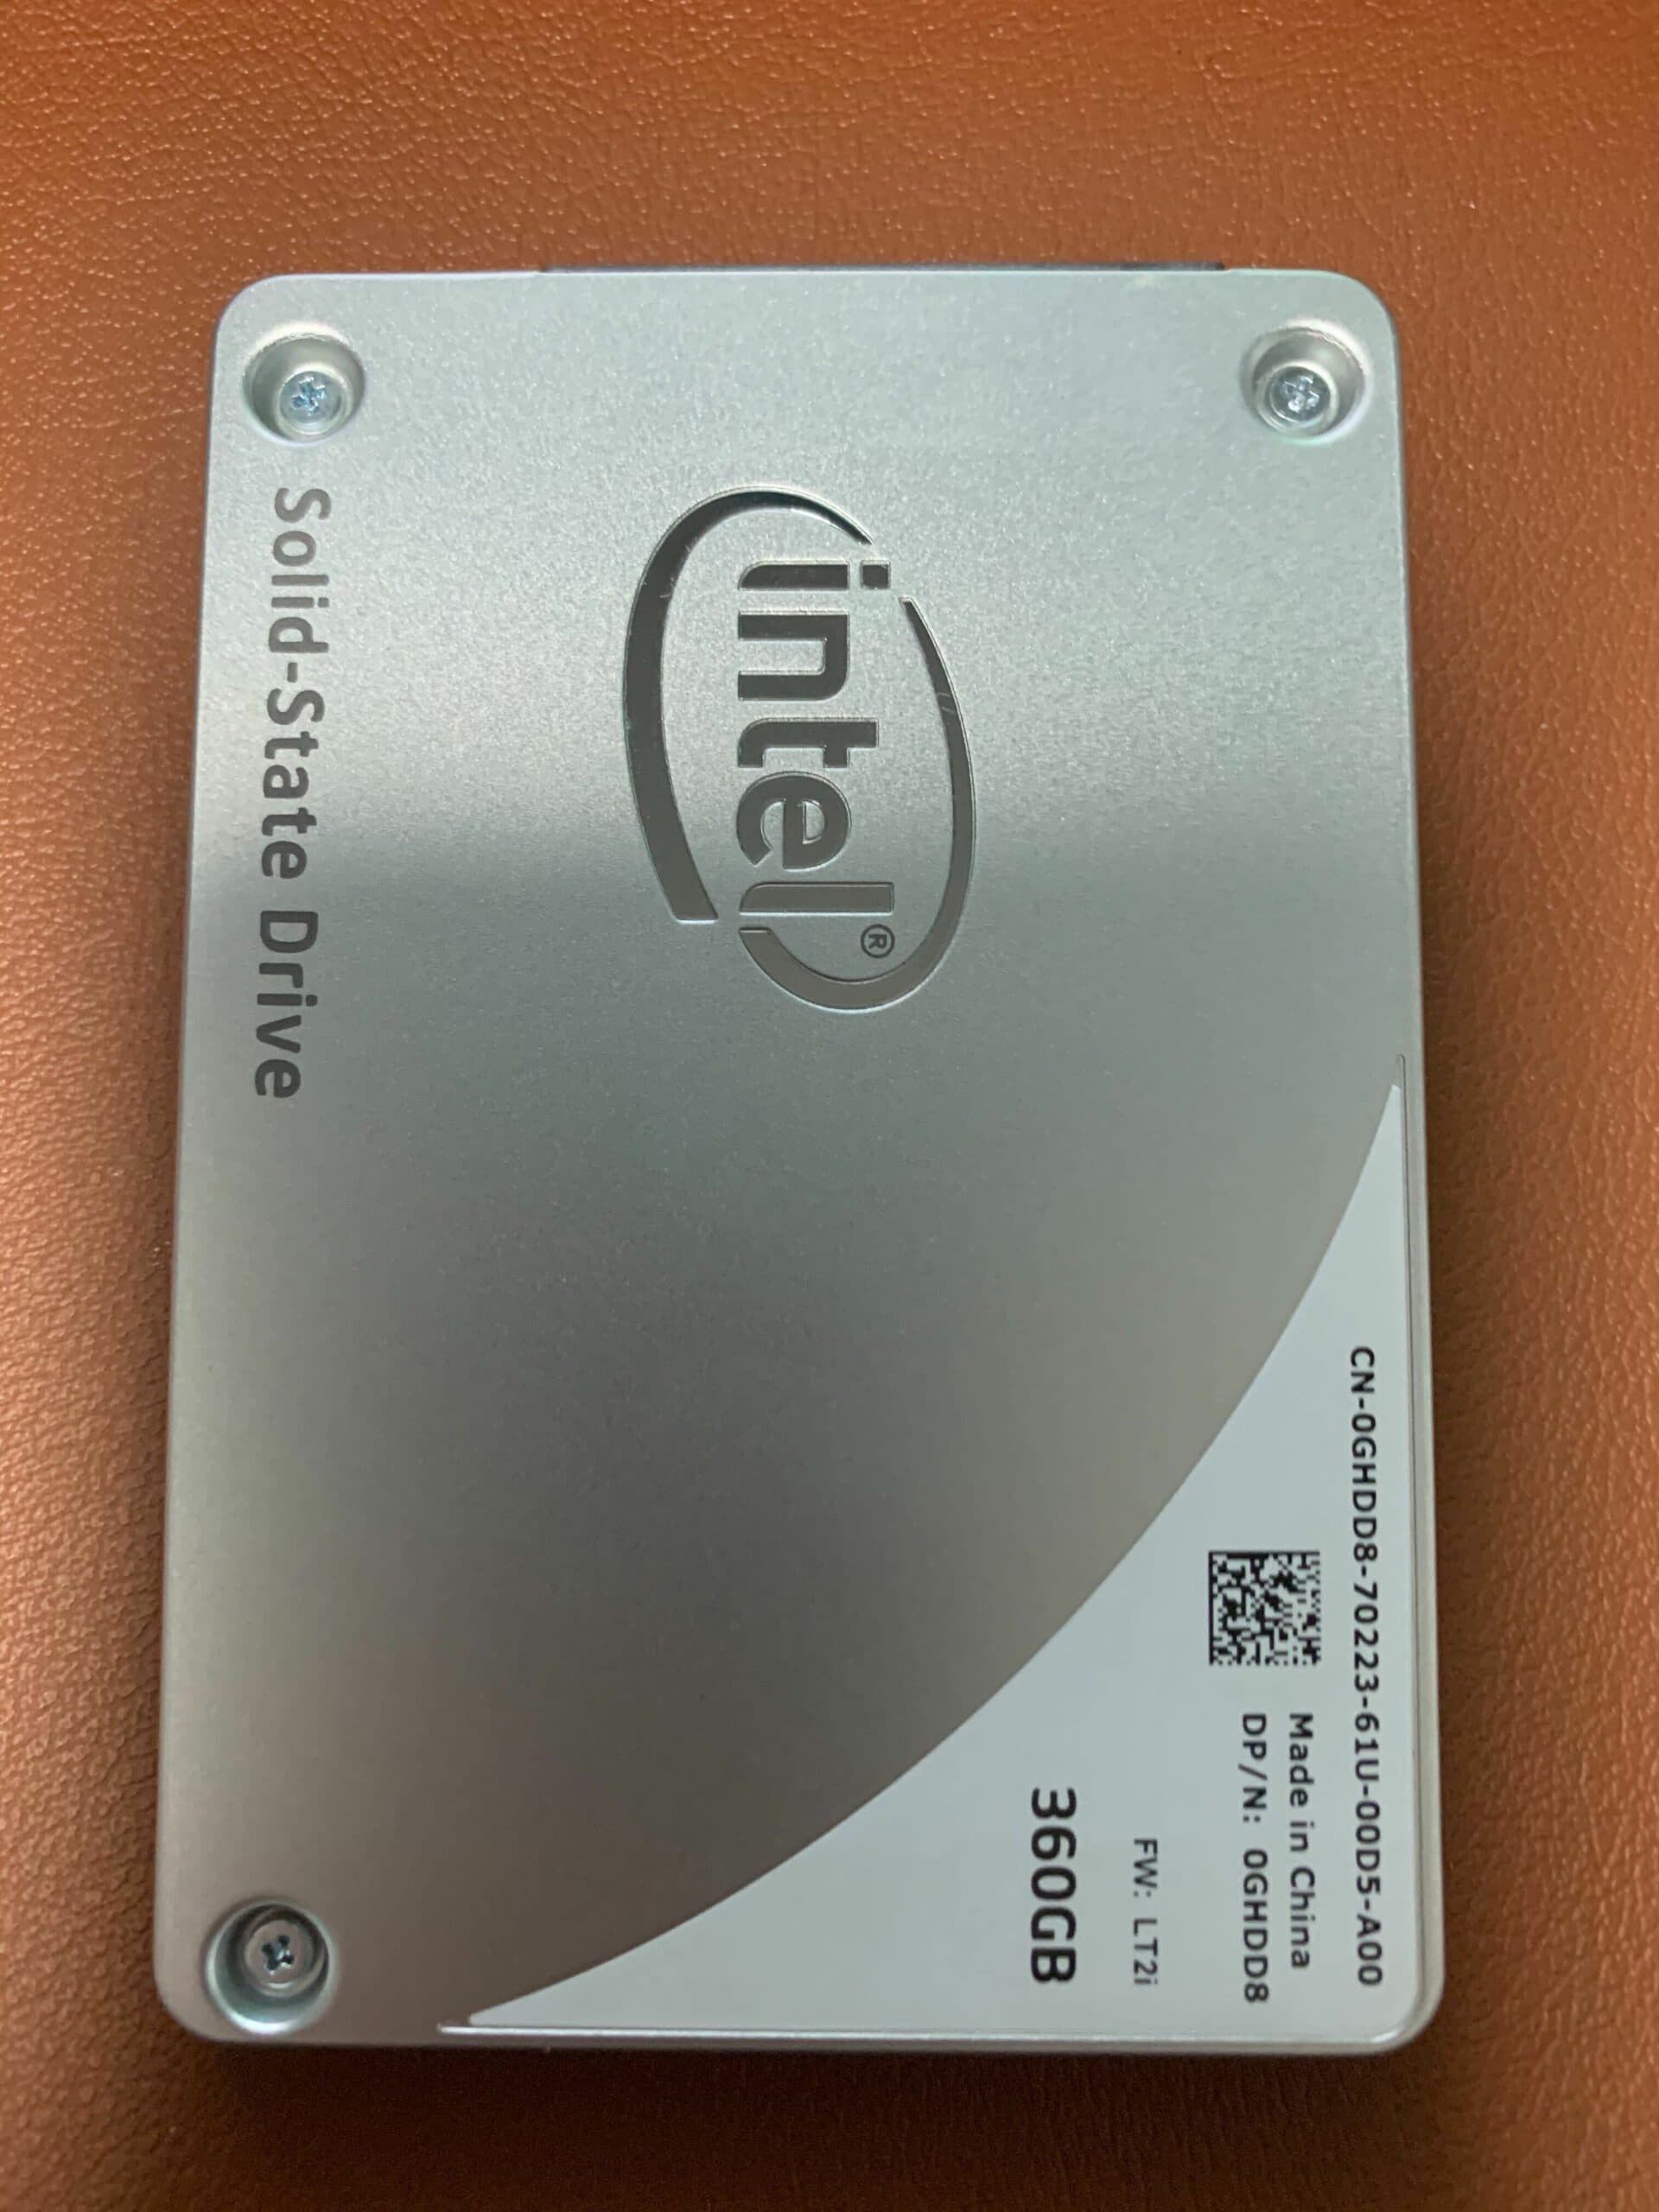 Intel Pro 2500 SSD That Stopped Working